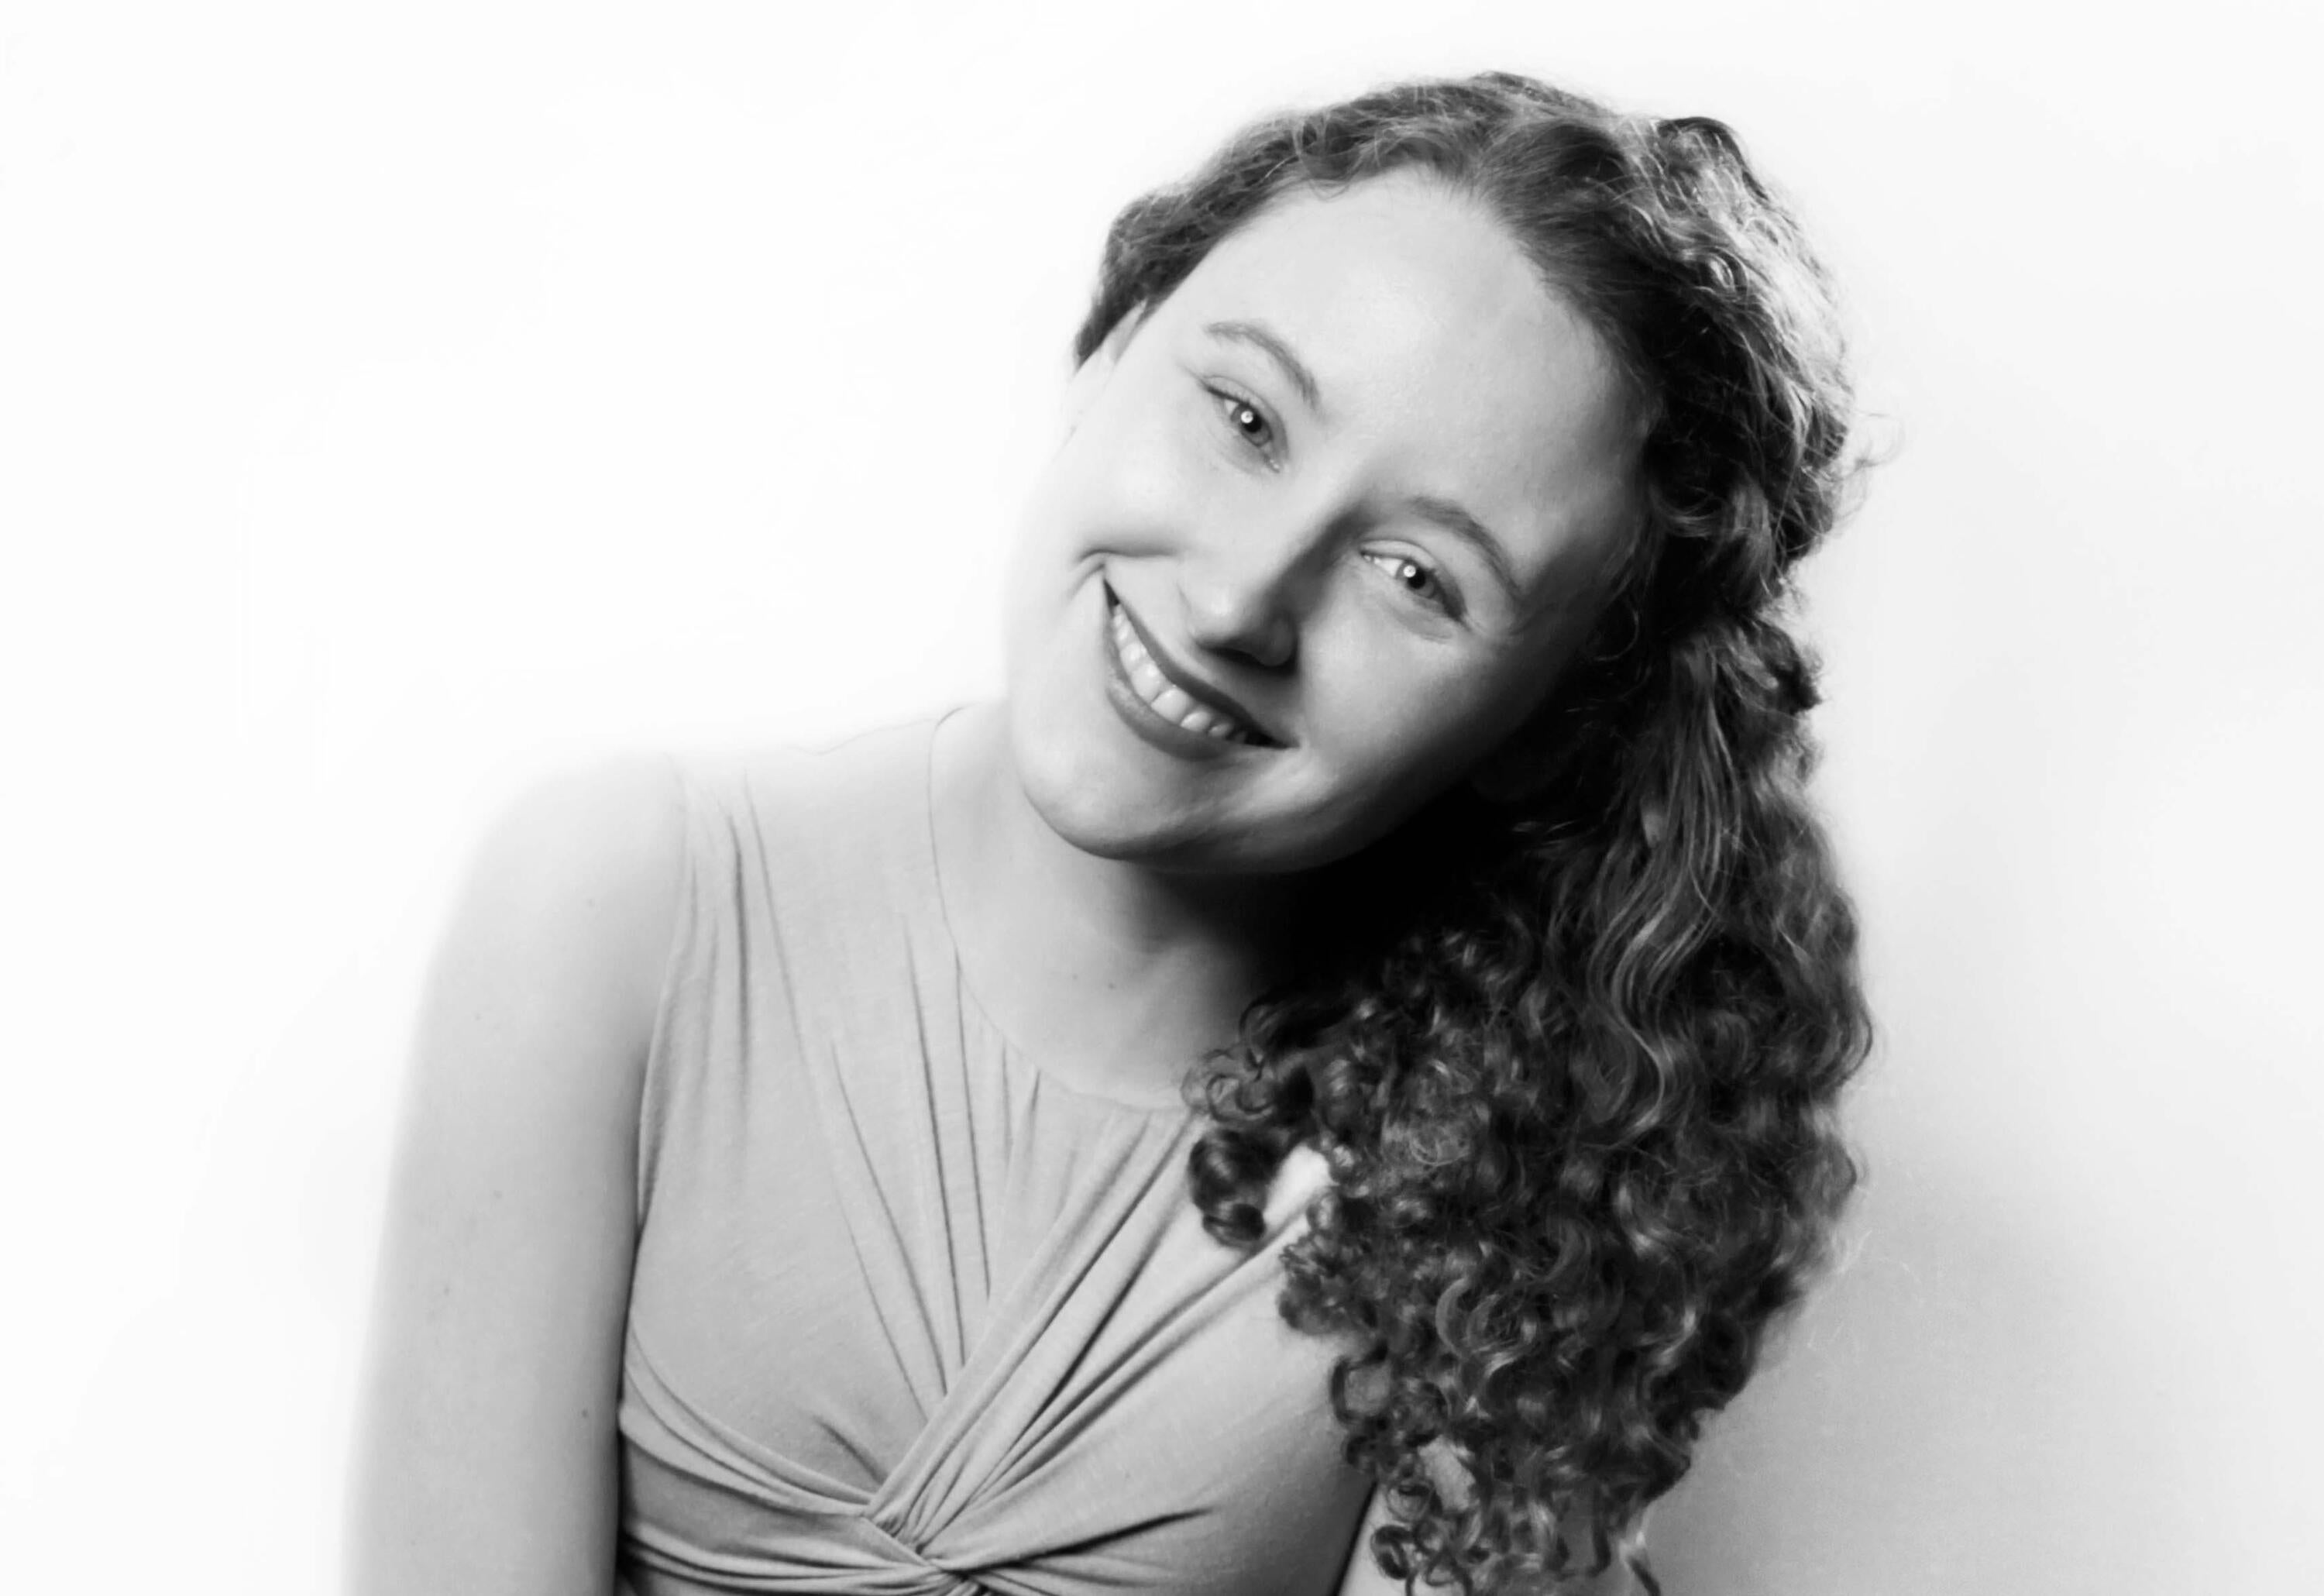 A black and white photograph of a smiling woman with curly hair